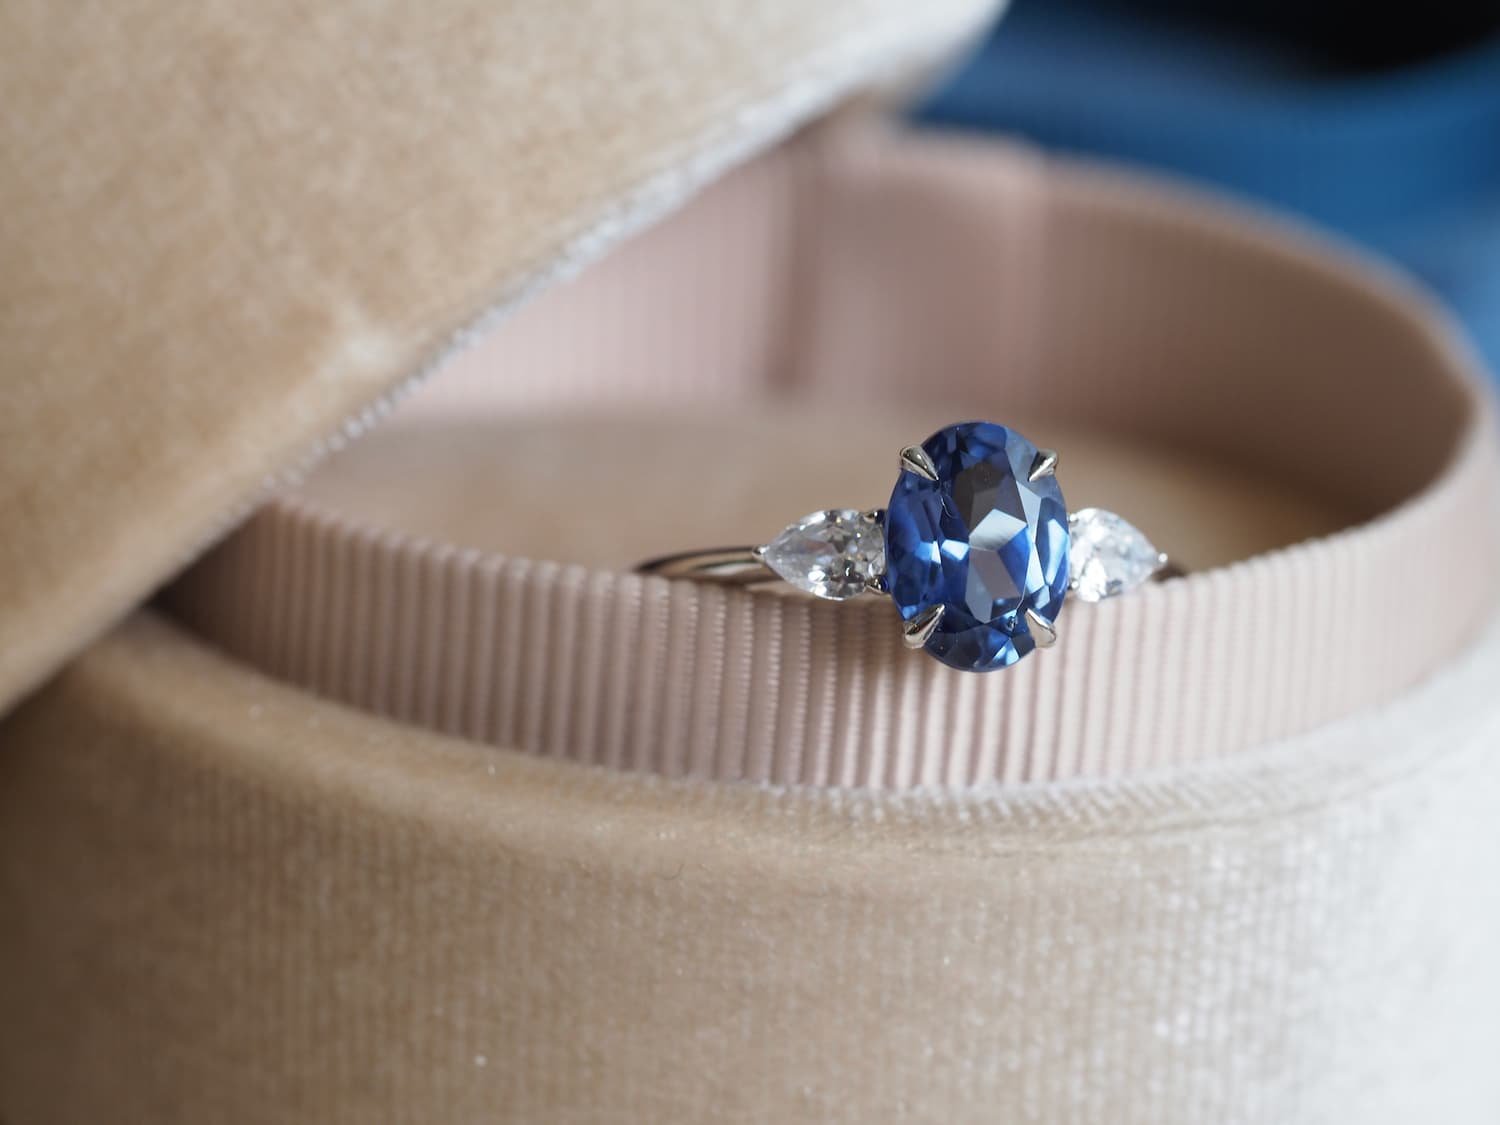 5-Stone Blue Sapphire Engagement Ring in Platinum with Diamond Halo JL